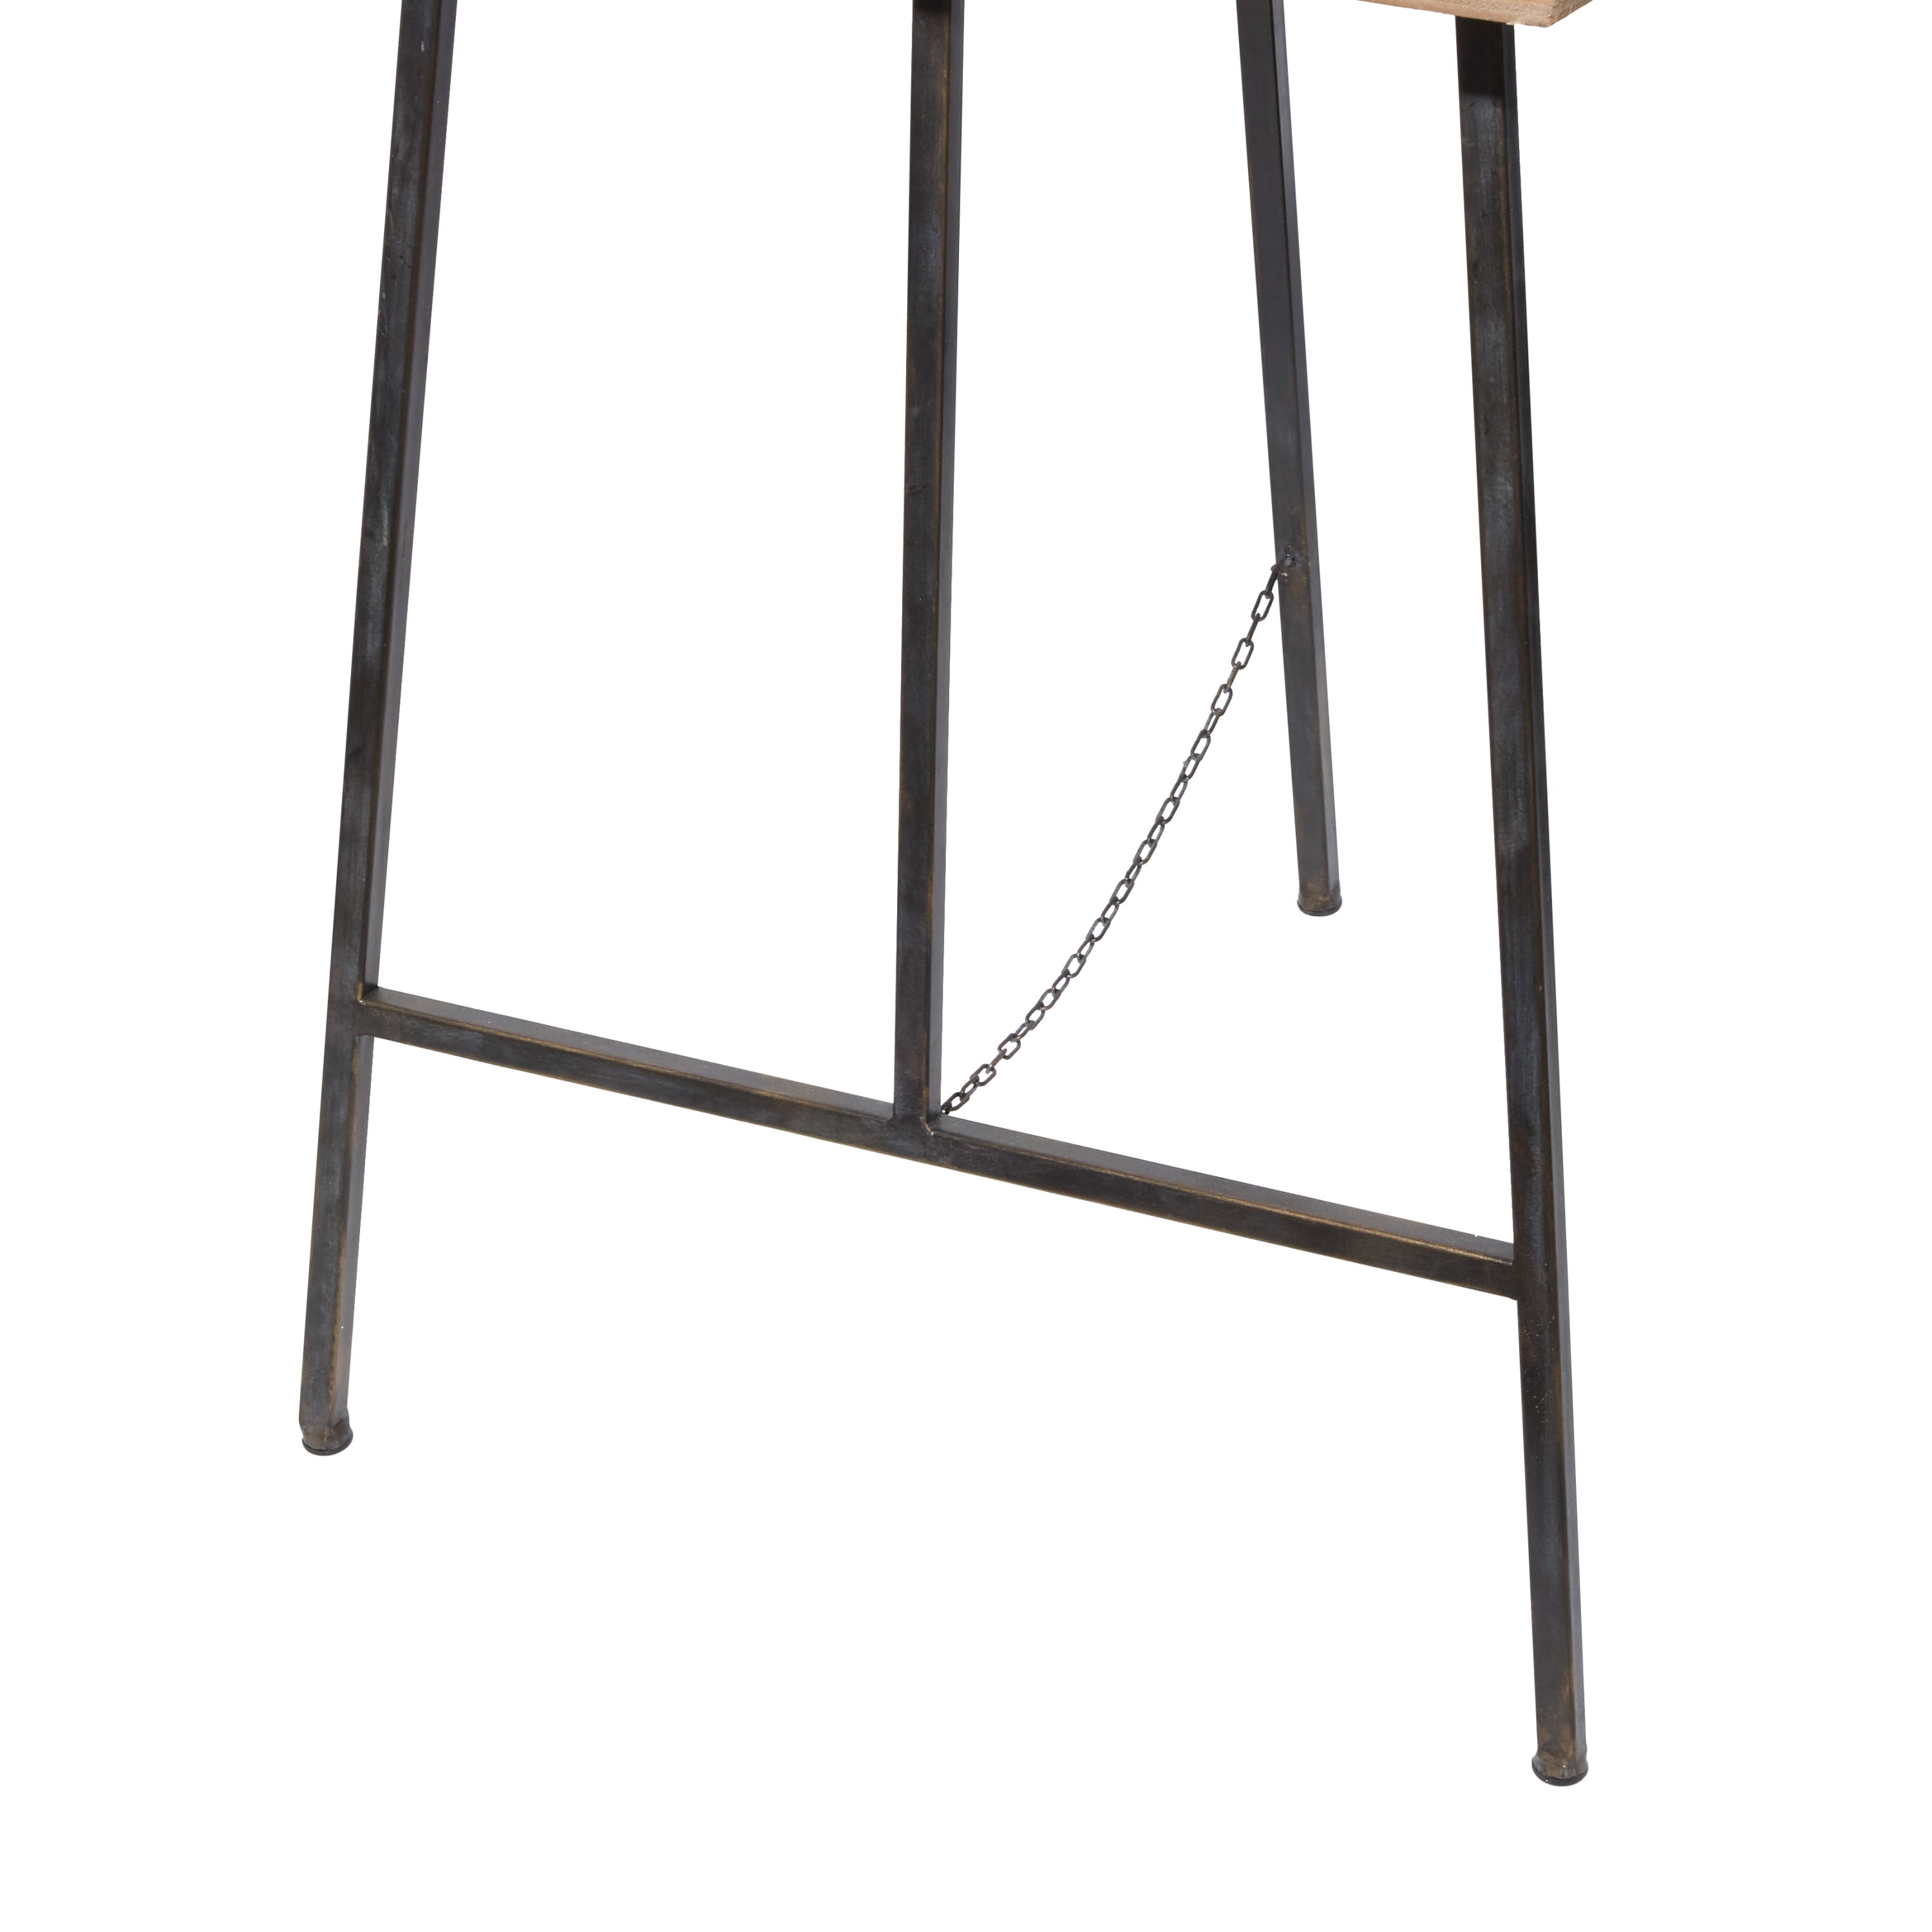 Bard's Black Wrought Iron Collapsible Easel Stand, 24 H x 16.5 W x 11 D  (For Objects up to 2 Deep)